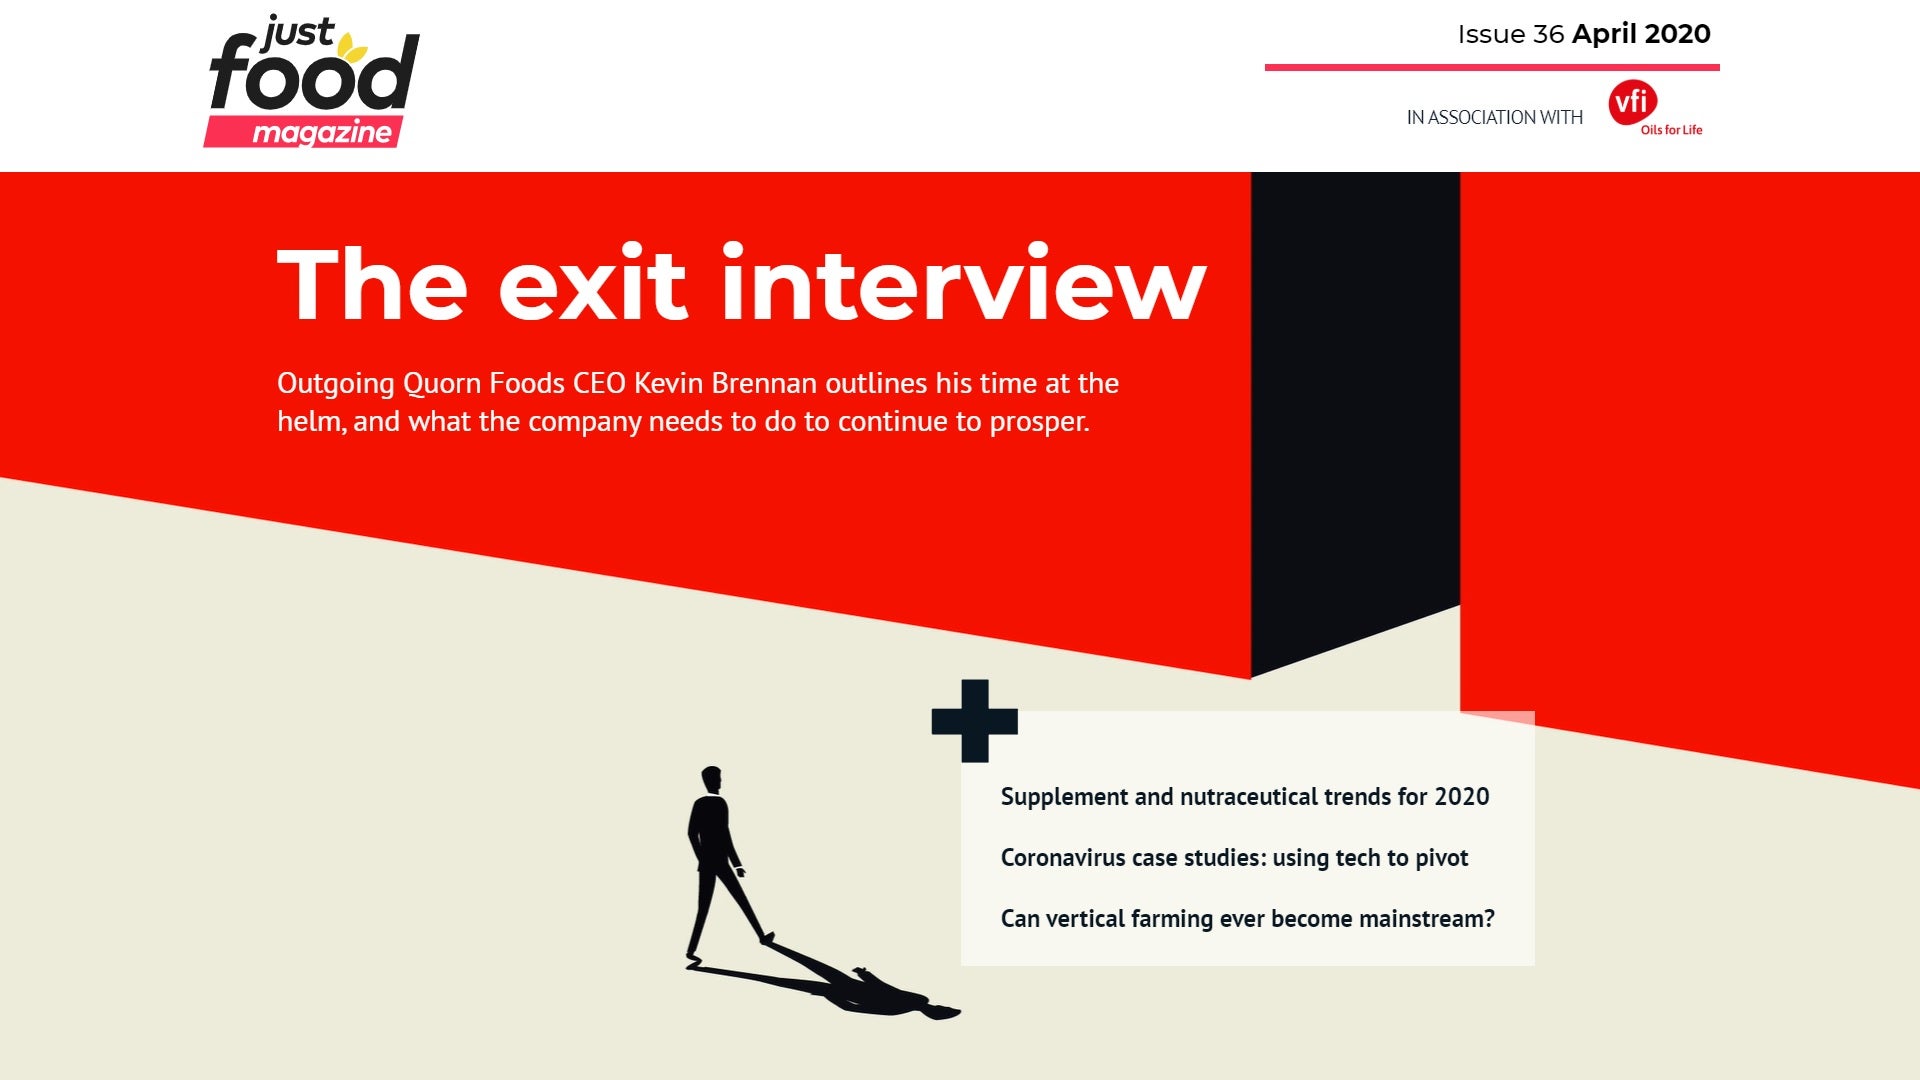 The exit interview with Quorn Foods' CEO: New issue of just-food out now